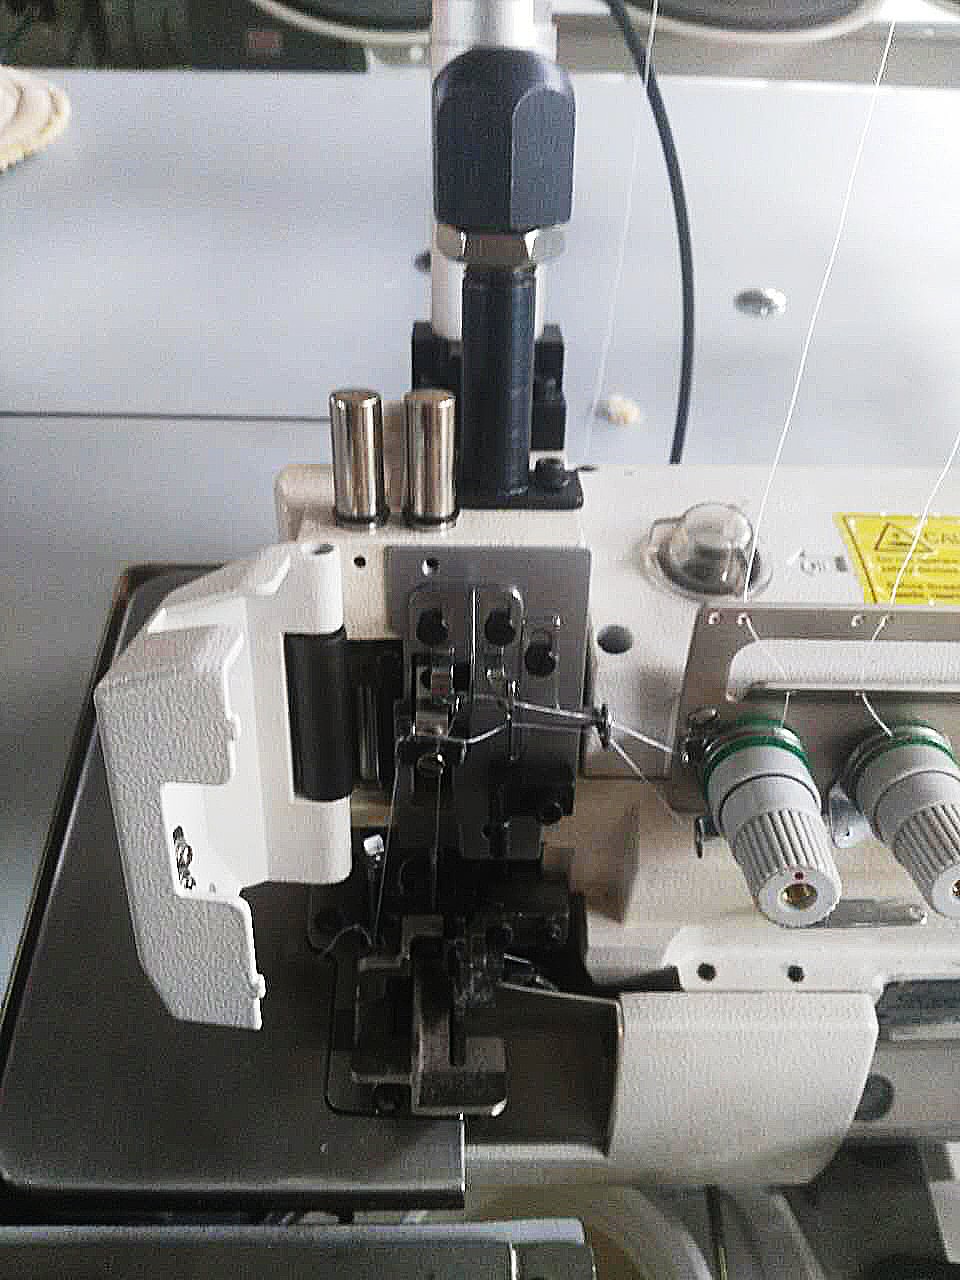 KB1A Multifunction Flanging Machine